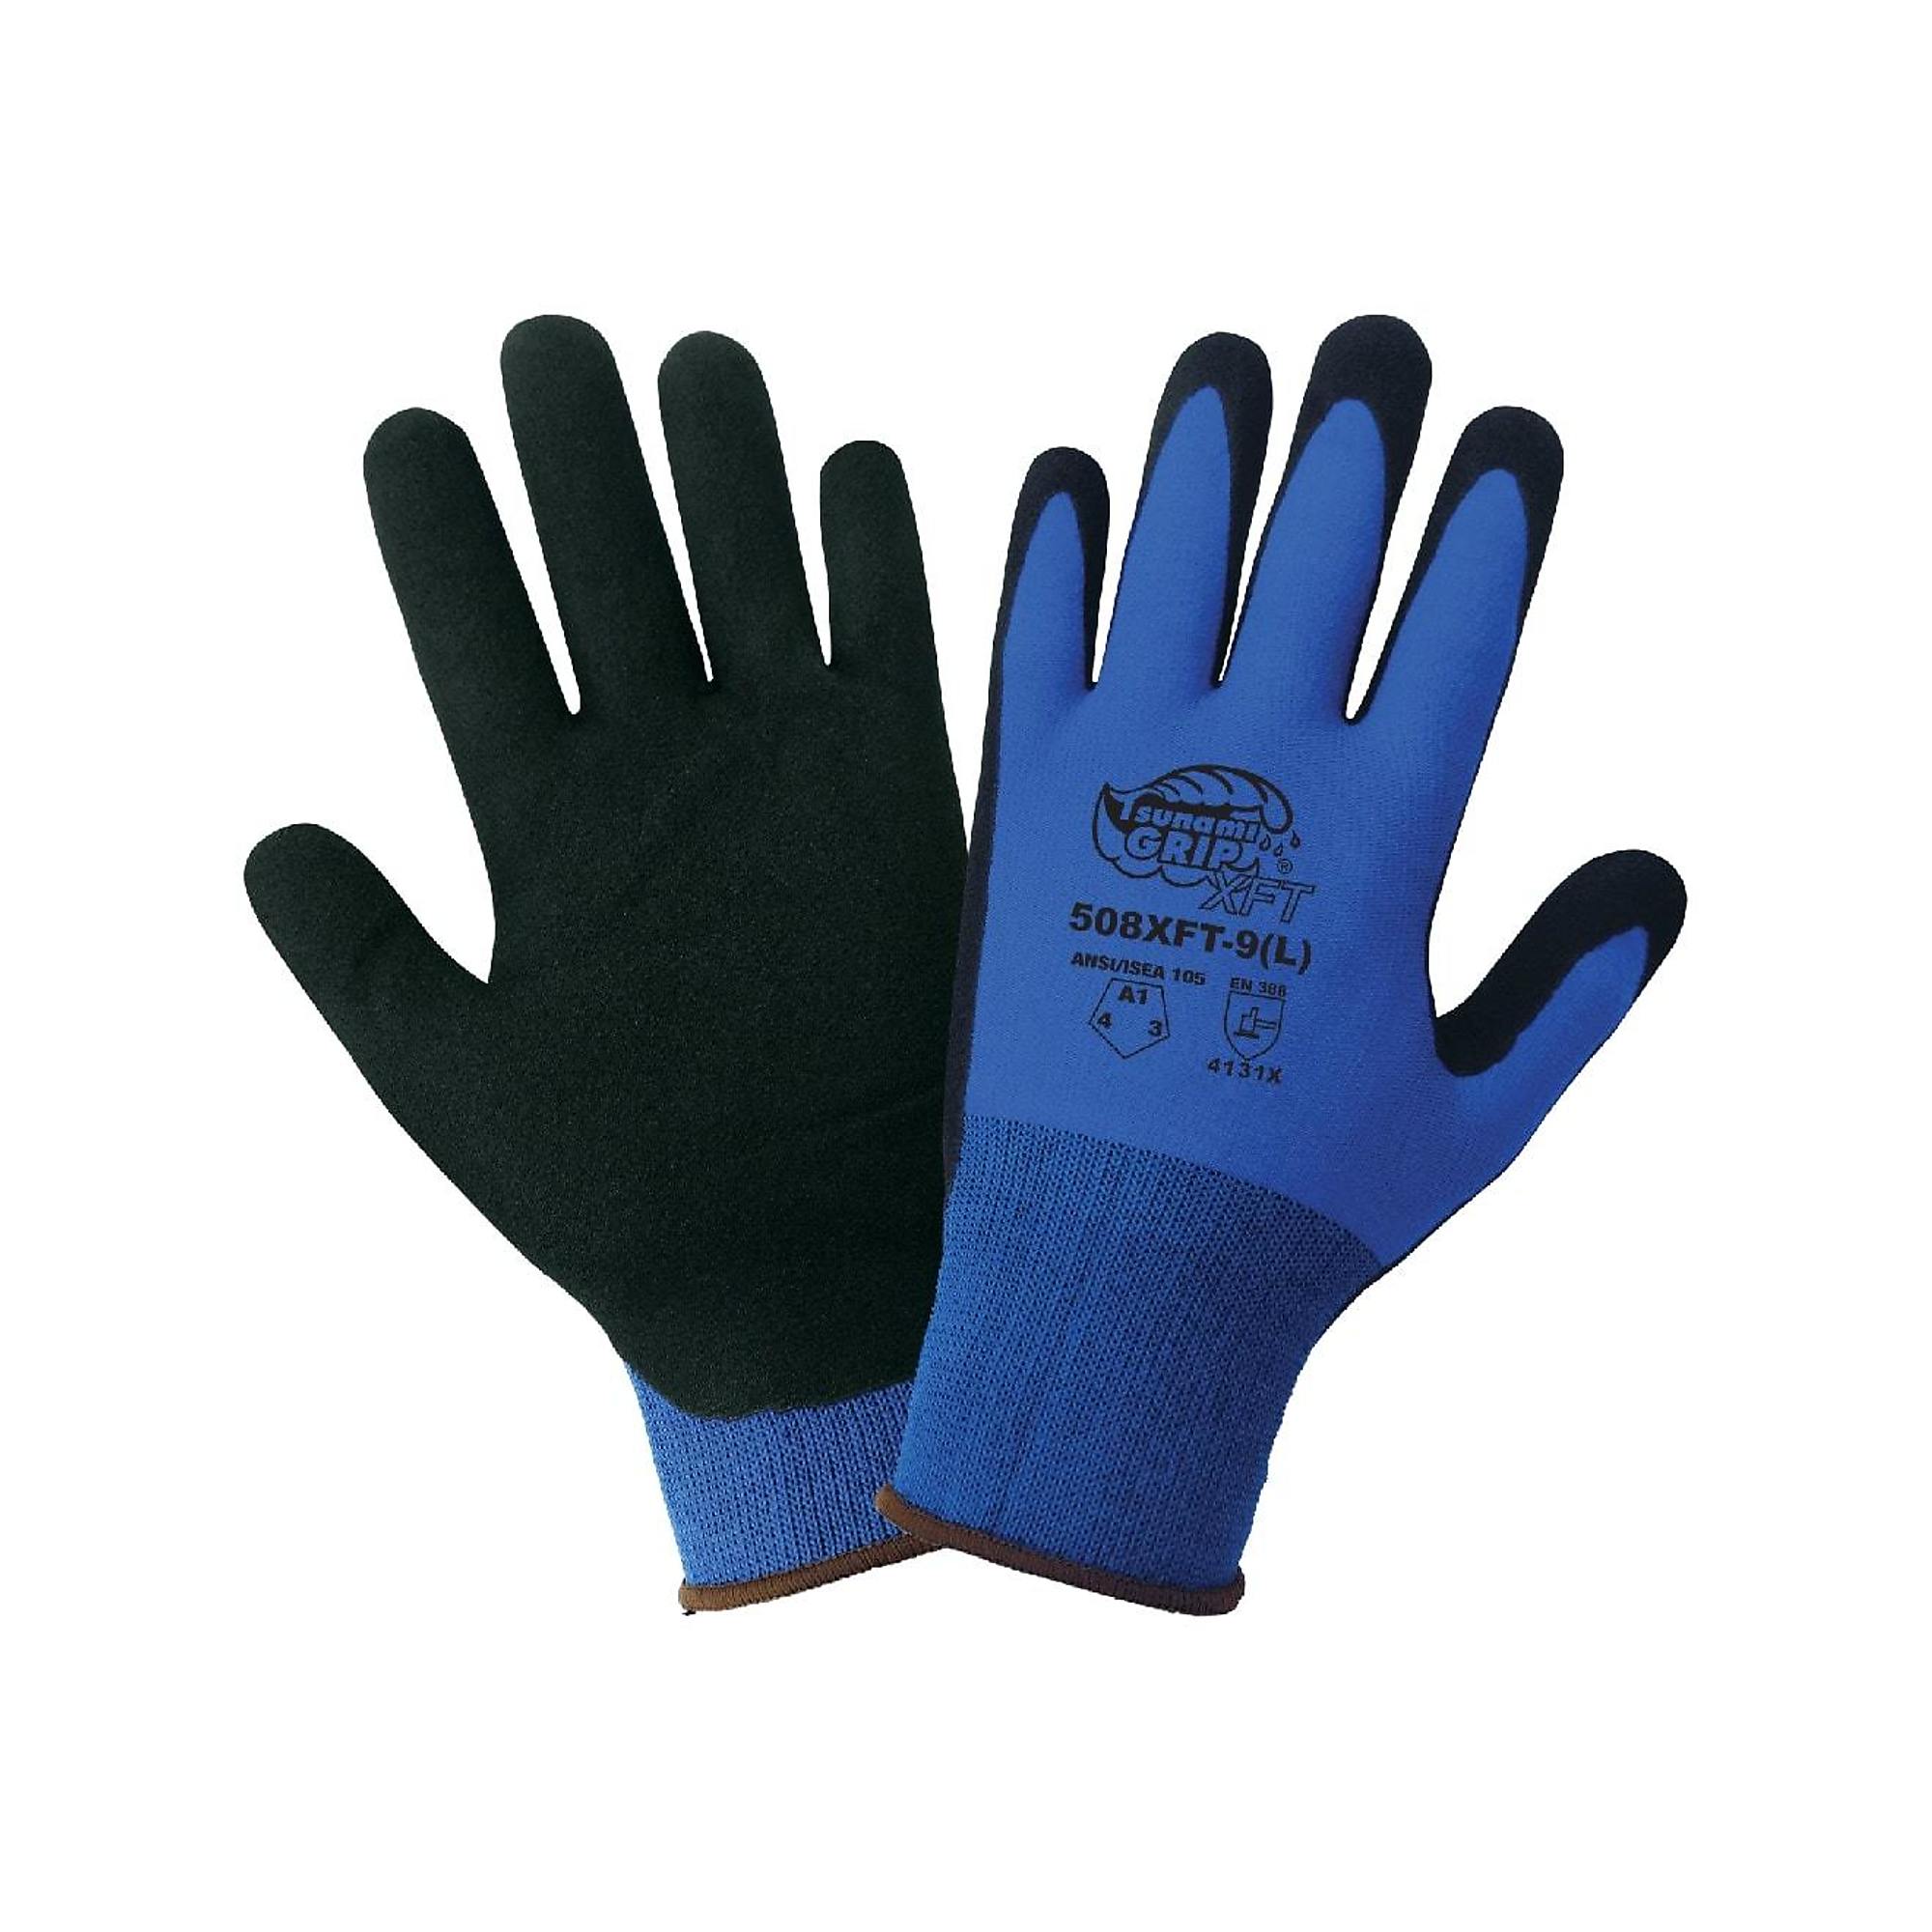 Global Glove Tsunami Grip , Blue, Black Foam Coated, Cut Resistant A1 Gloves - 12 Pairs, Size S, Color Blue/Black, Included (qty.) 12 Model 508XFT-7(S